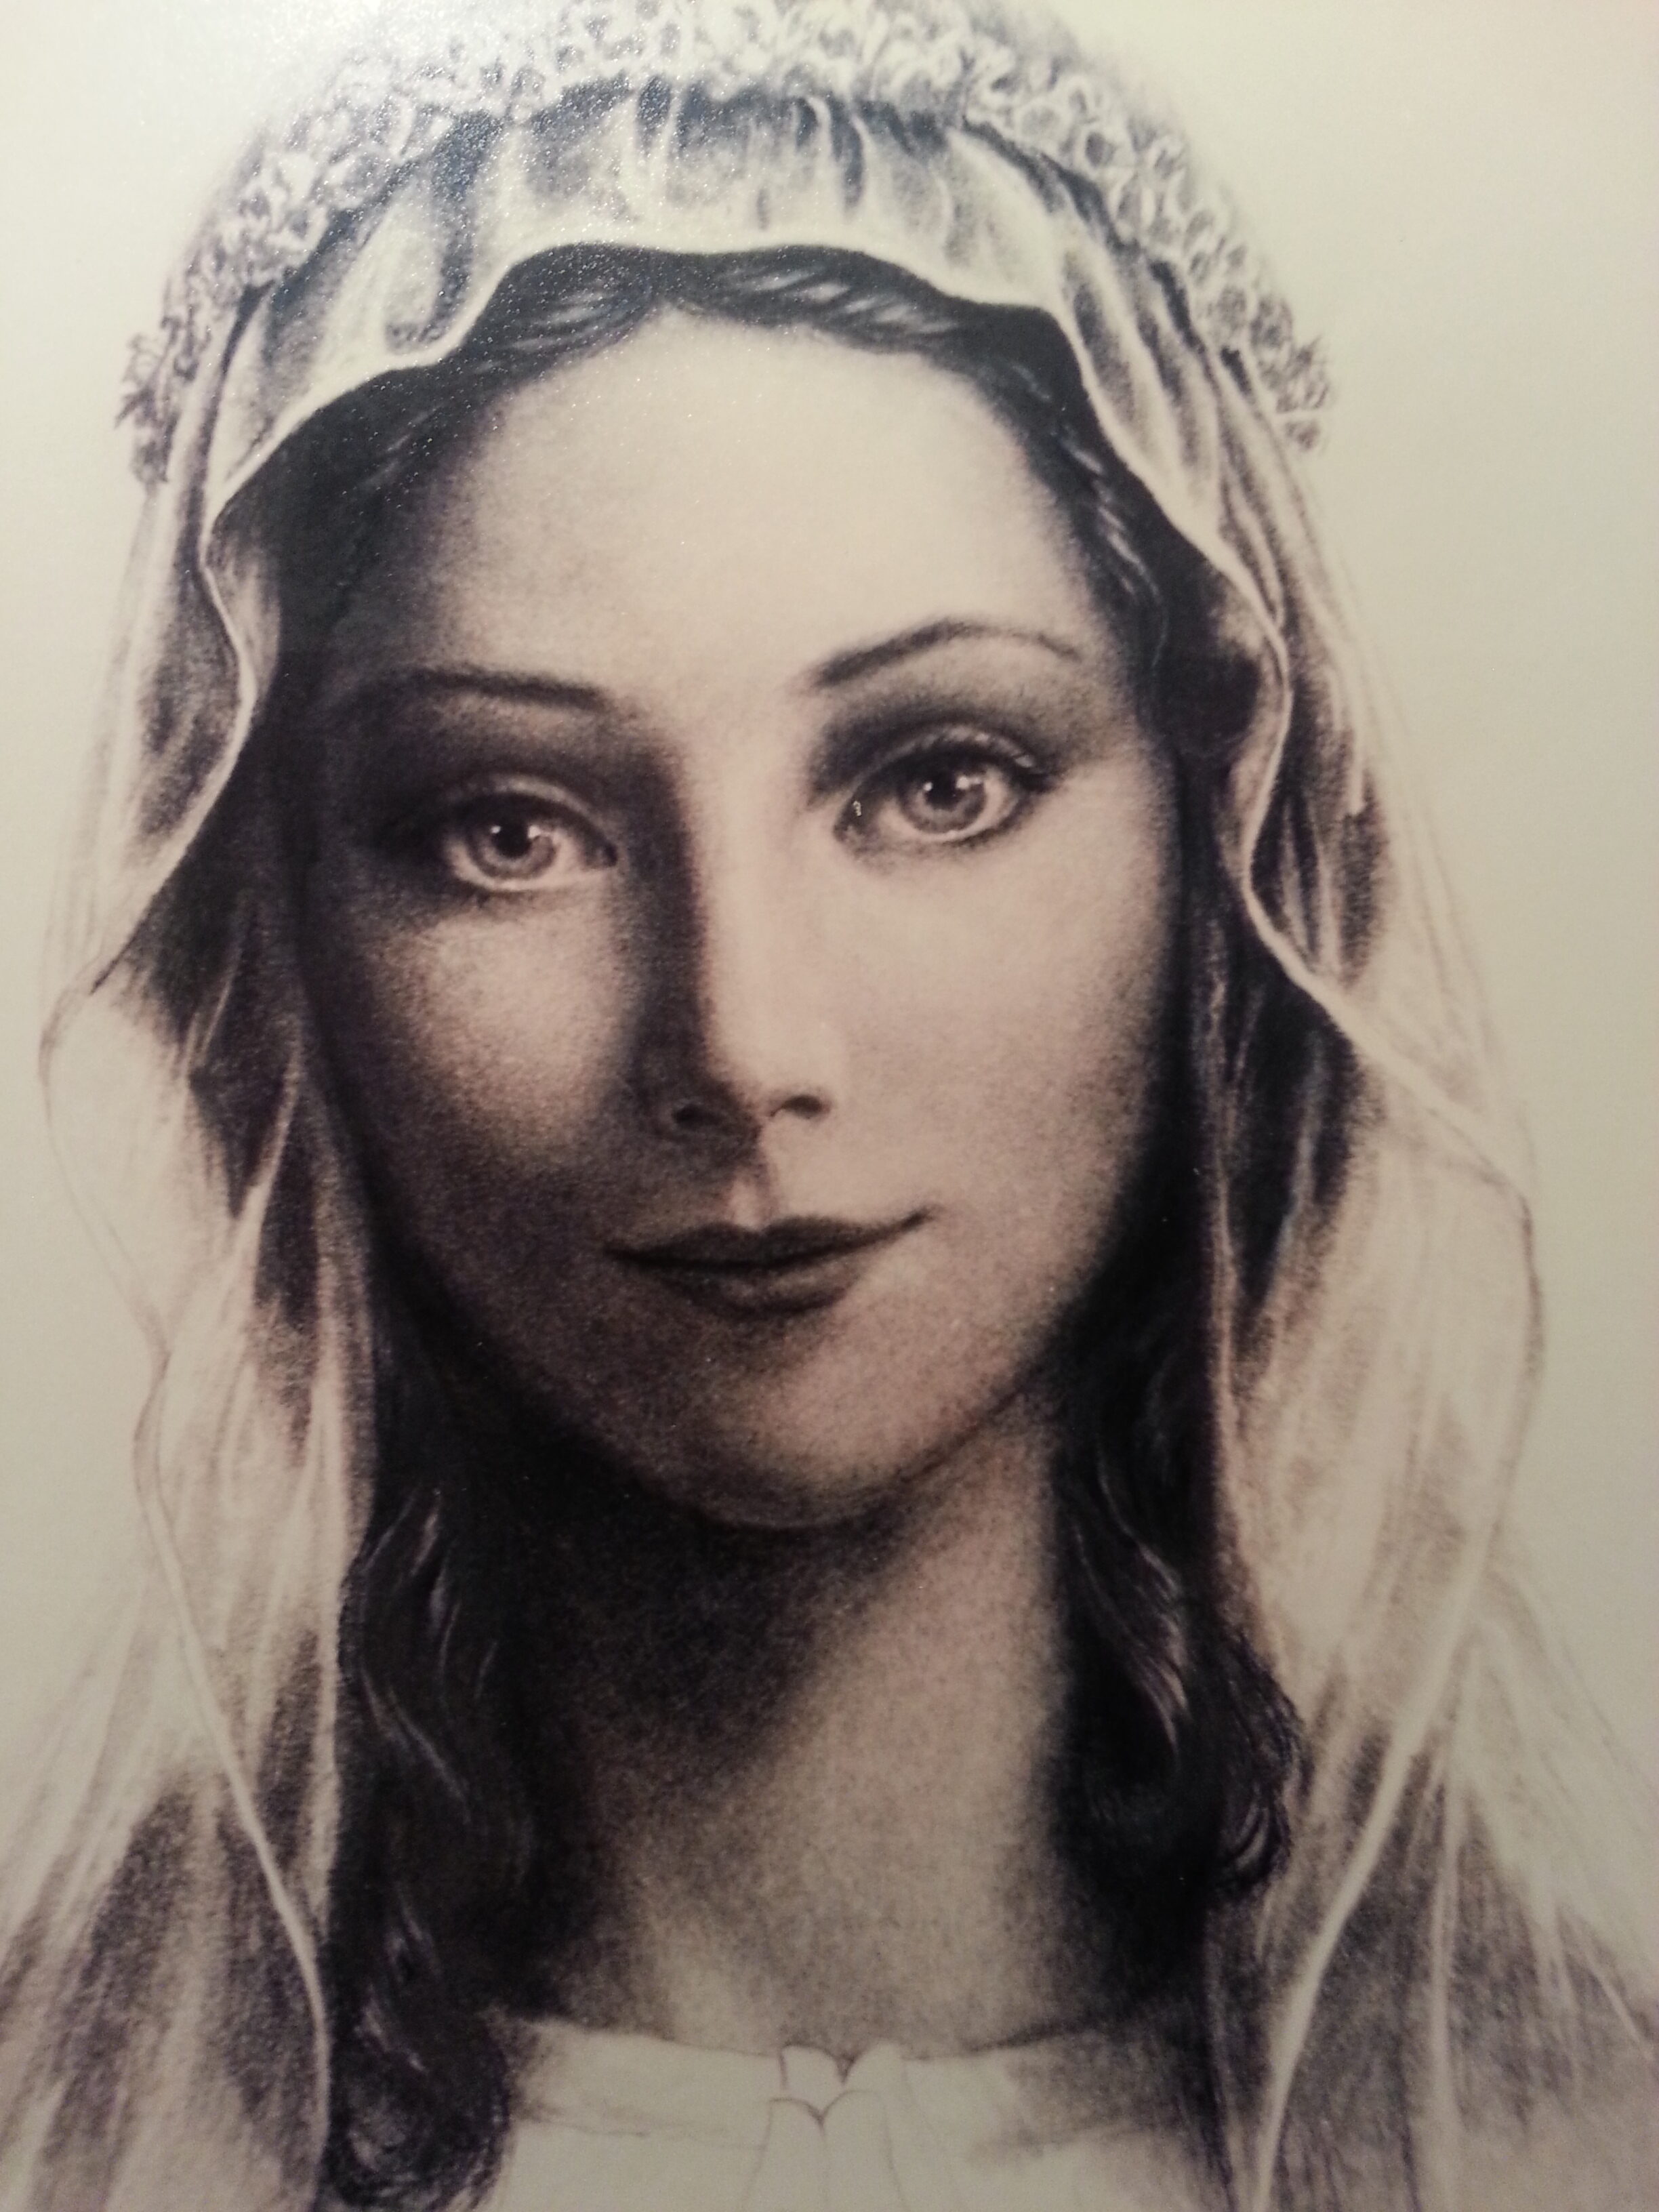 Litany for our Blessed Mother